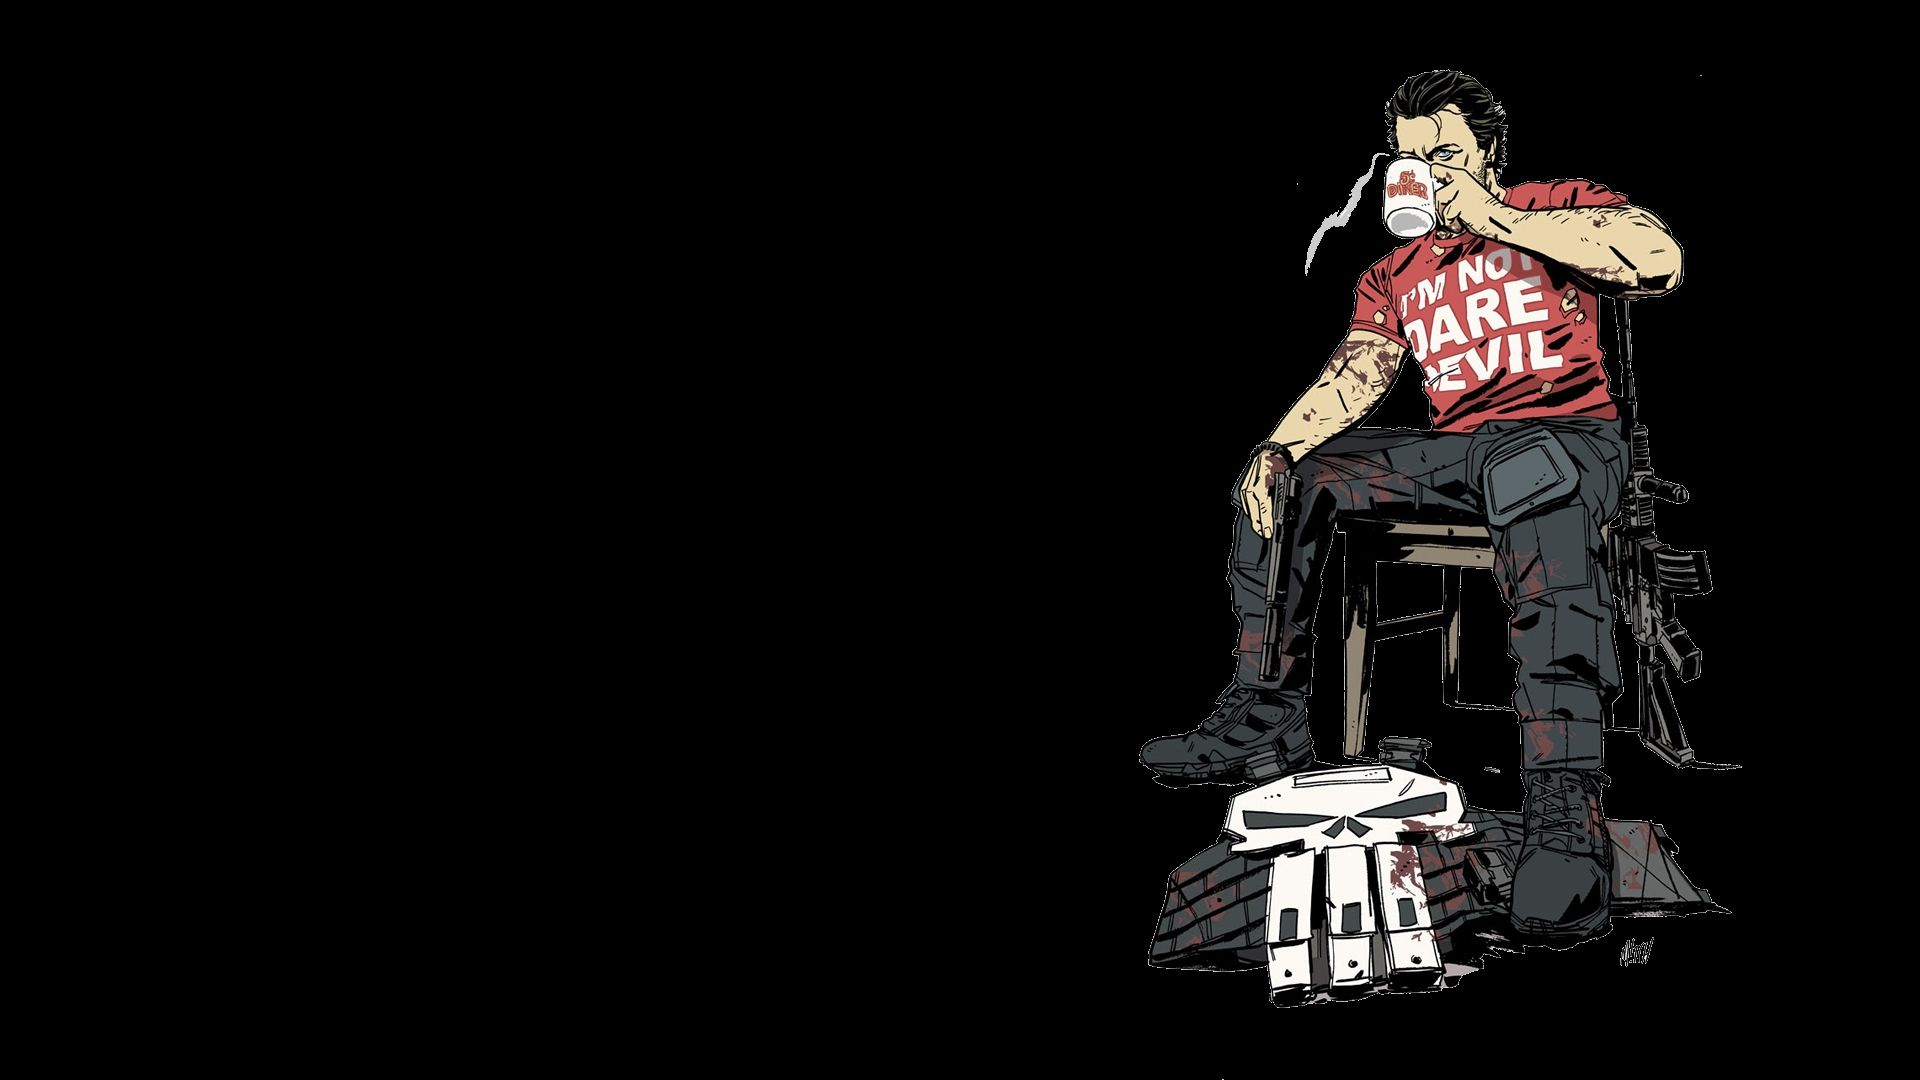 1920x1080 Punisher Backgrounds (37 Wallpapers) &acirc;&#128;&#147; Adorable Wallpapers | Punisher, Punisher netflix, Hd wallpaper